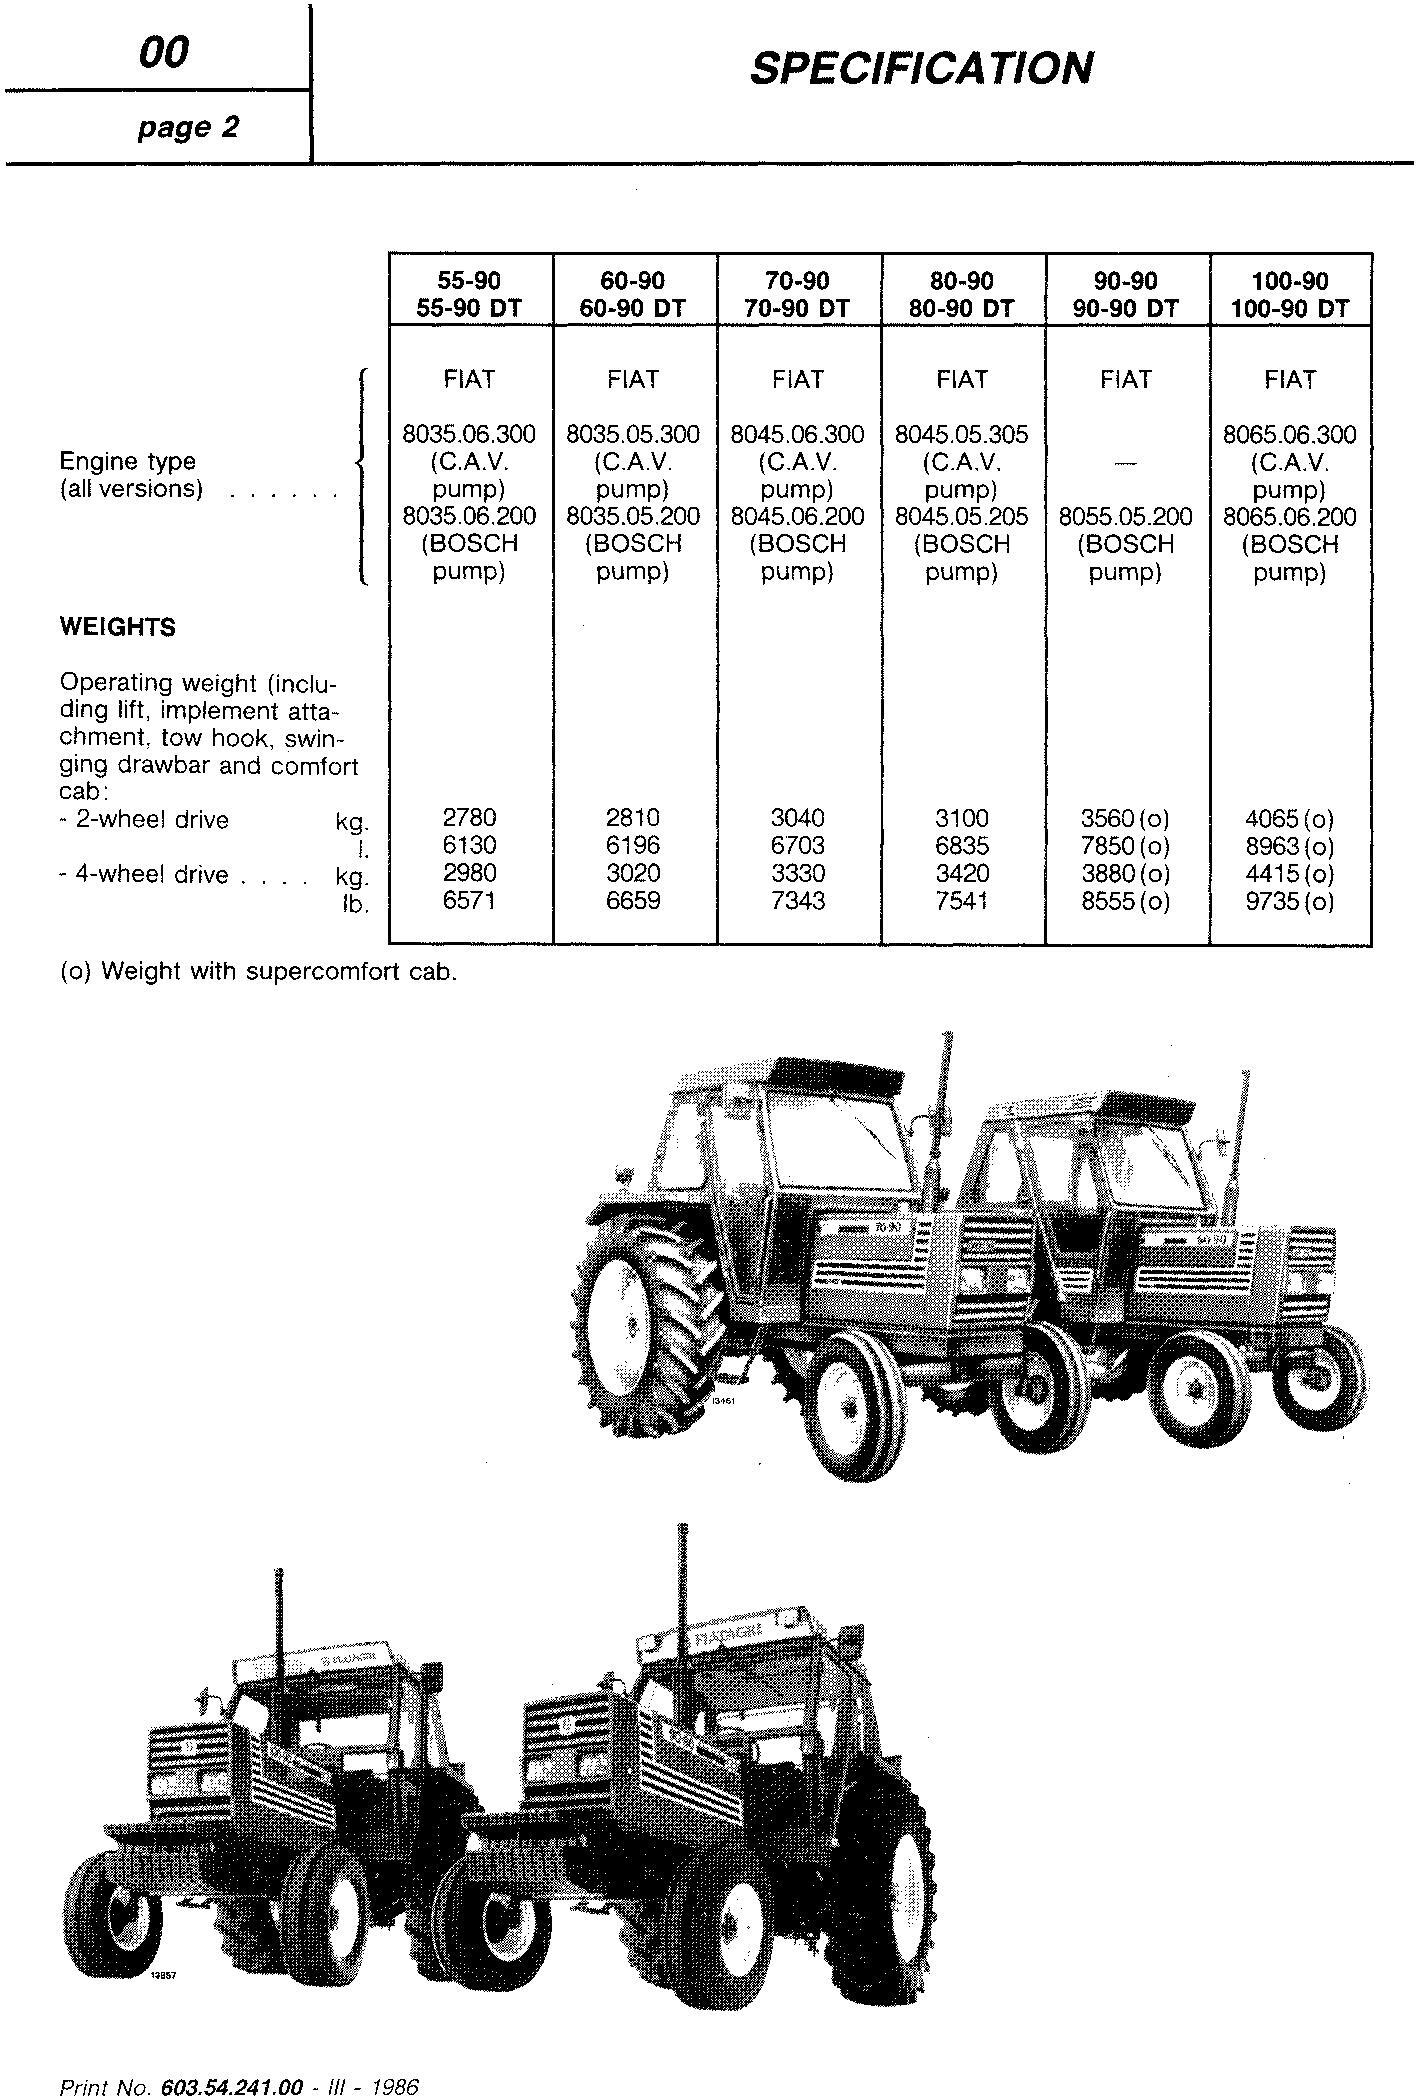 Fiat 55-90, 60-90, 70-90, 80-90, 90-90, 100- 90 Tractor Service Manual (6035424100) - 1